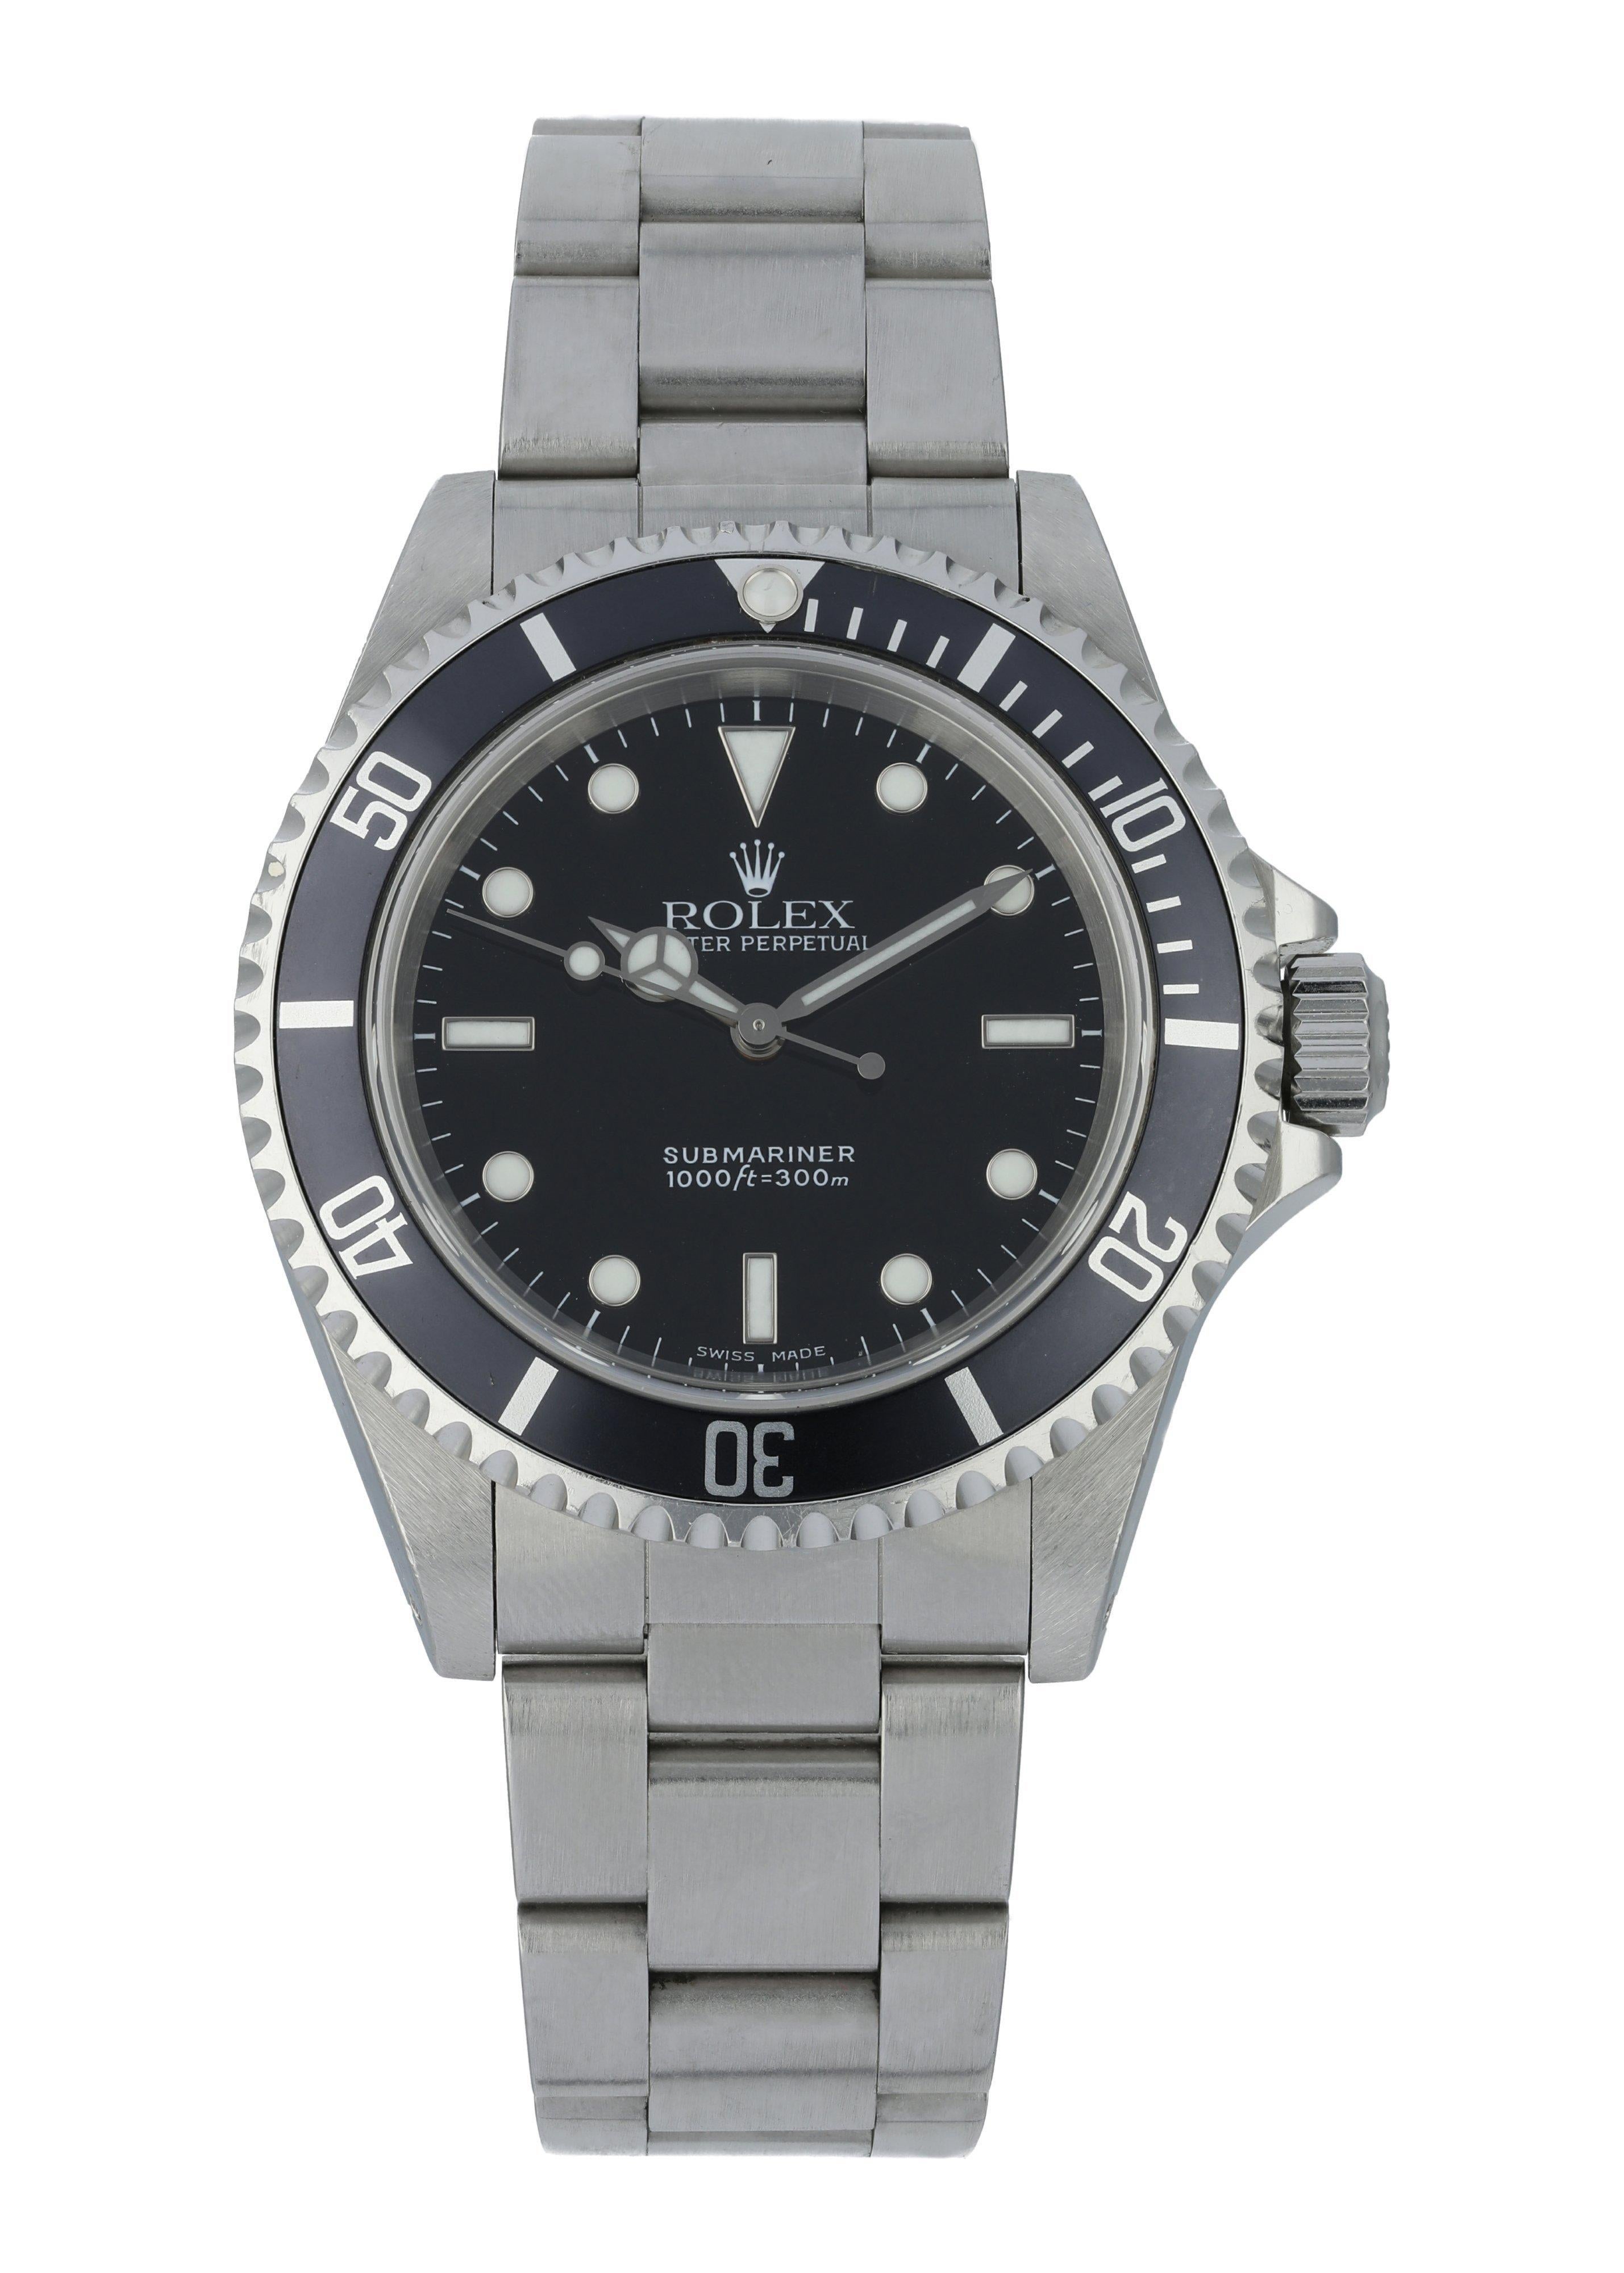 Rolex Submariner 14060 Men's Watch.
42mm Stainless Steel case. 
Stainless Steel Unidirectional rotating bezel. 
Black dial with Luminous Steel hands and luminous dot hour markers. 
Minute markers on the outer dial. 
Stainless Steel Stainless Steel